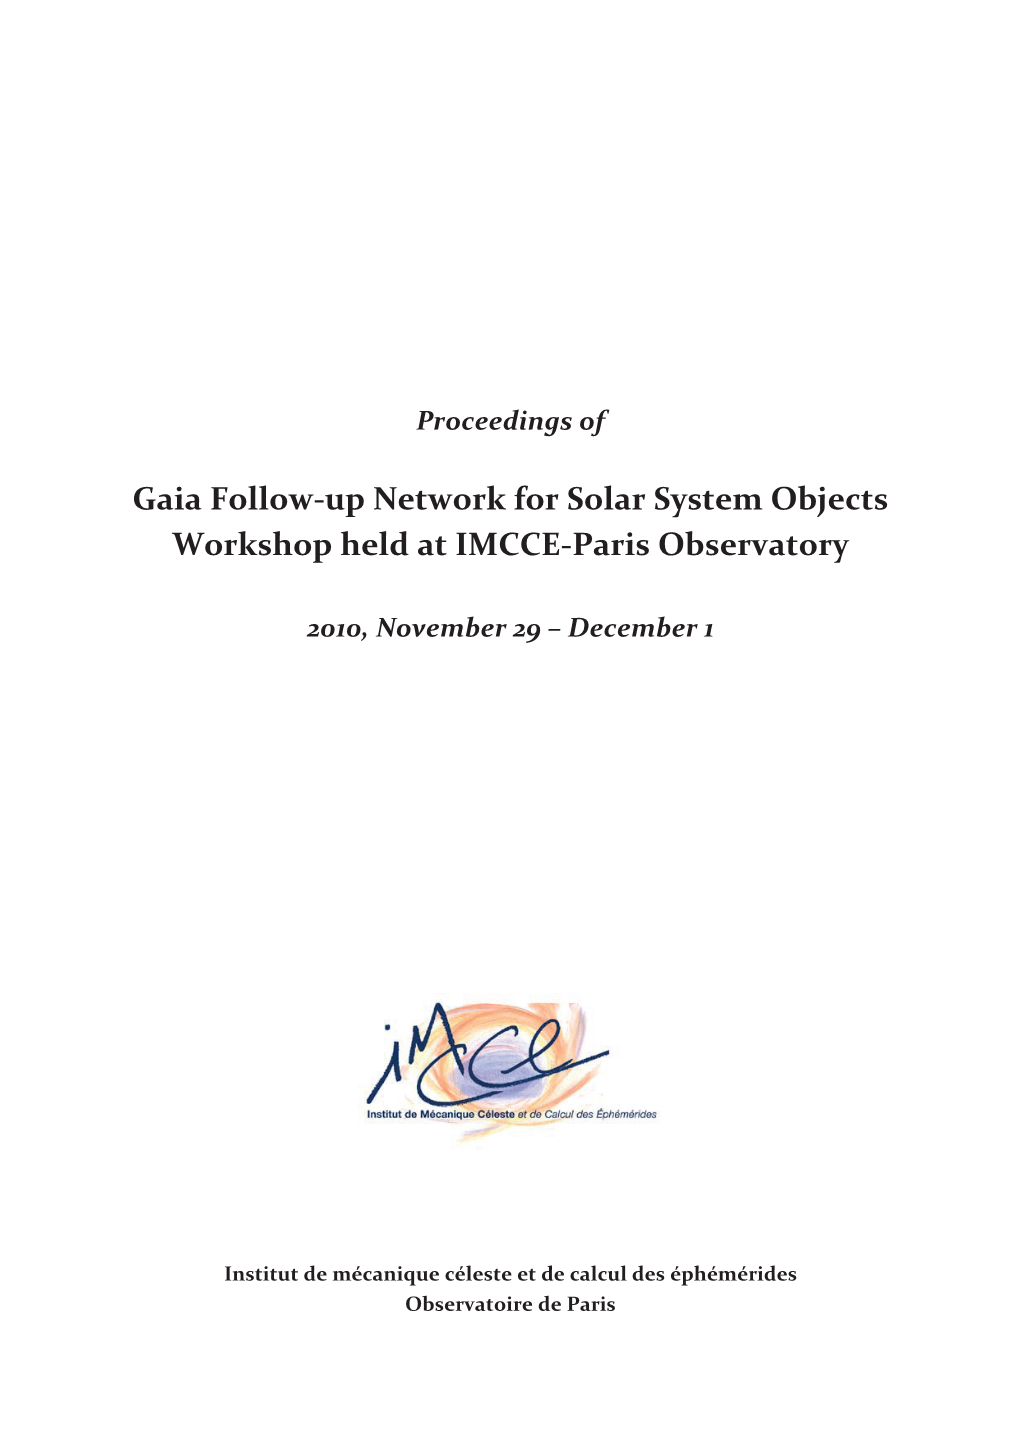 Gaia Follow-Up Network for Solar System Objects Workshop Held at IMCCE-Paris Observatory